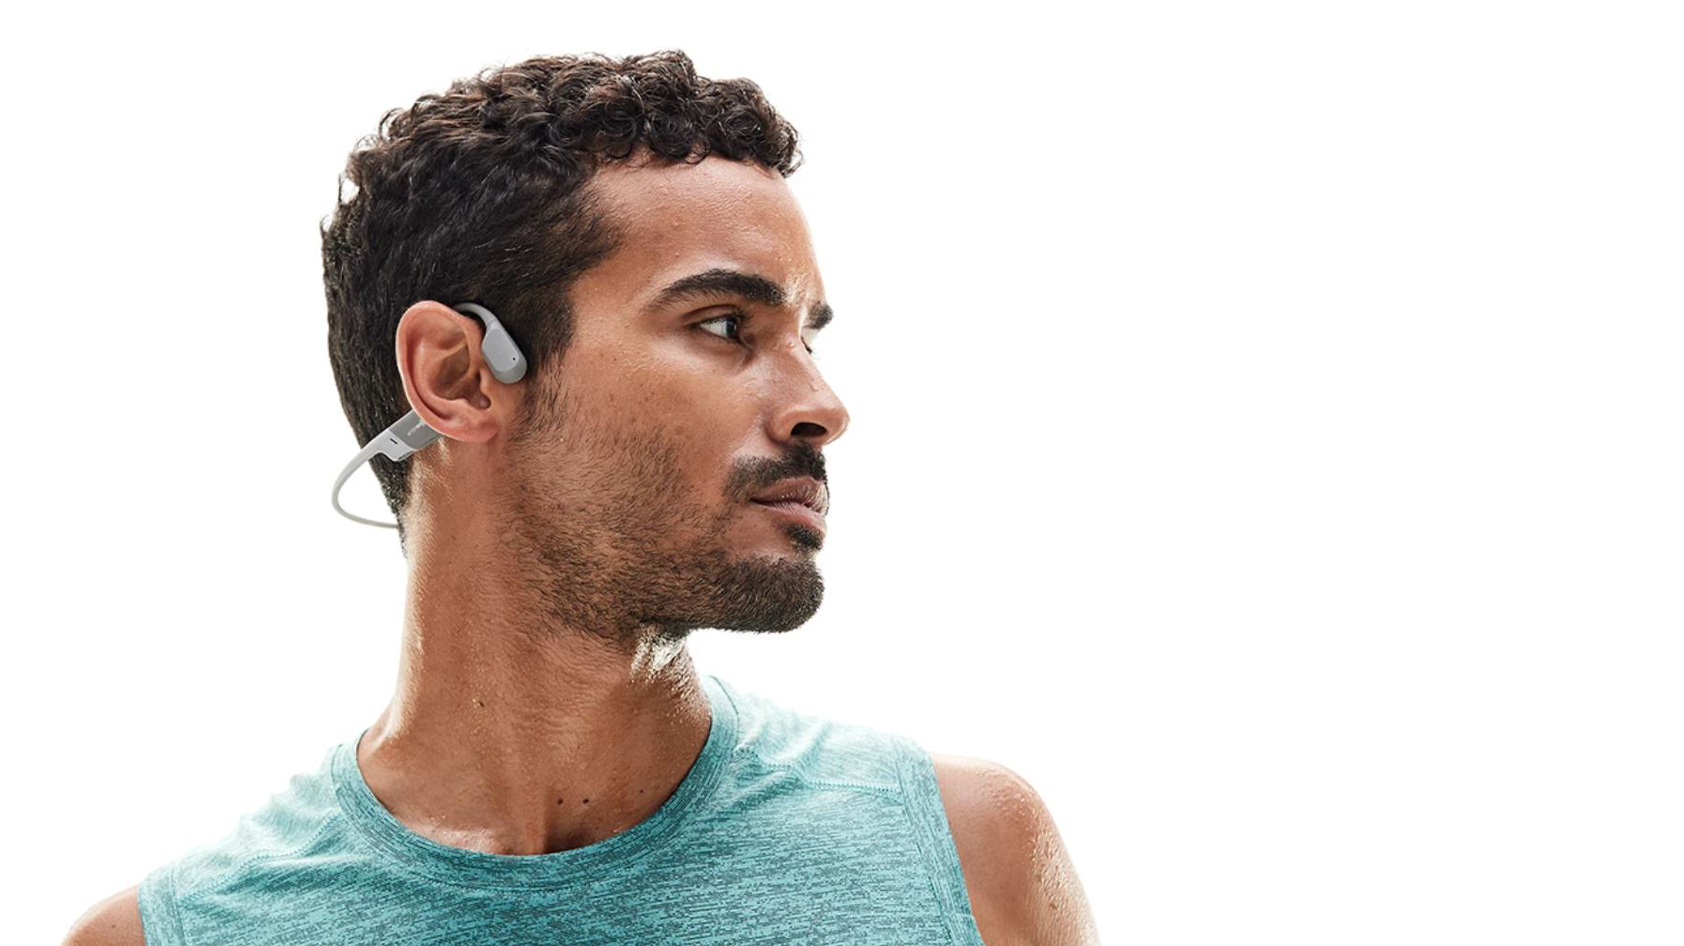 A picture of a man in profile wearing the AfterShokz Aeropex bone conduction headphones.